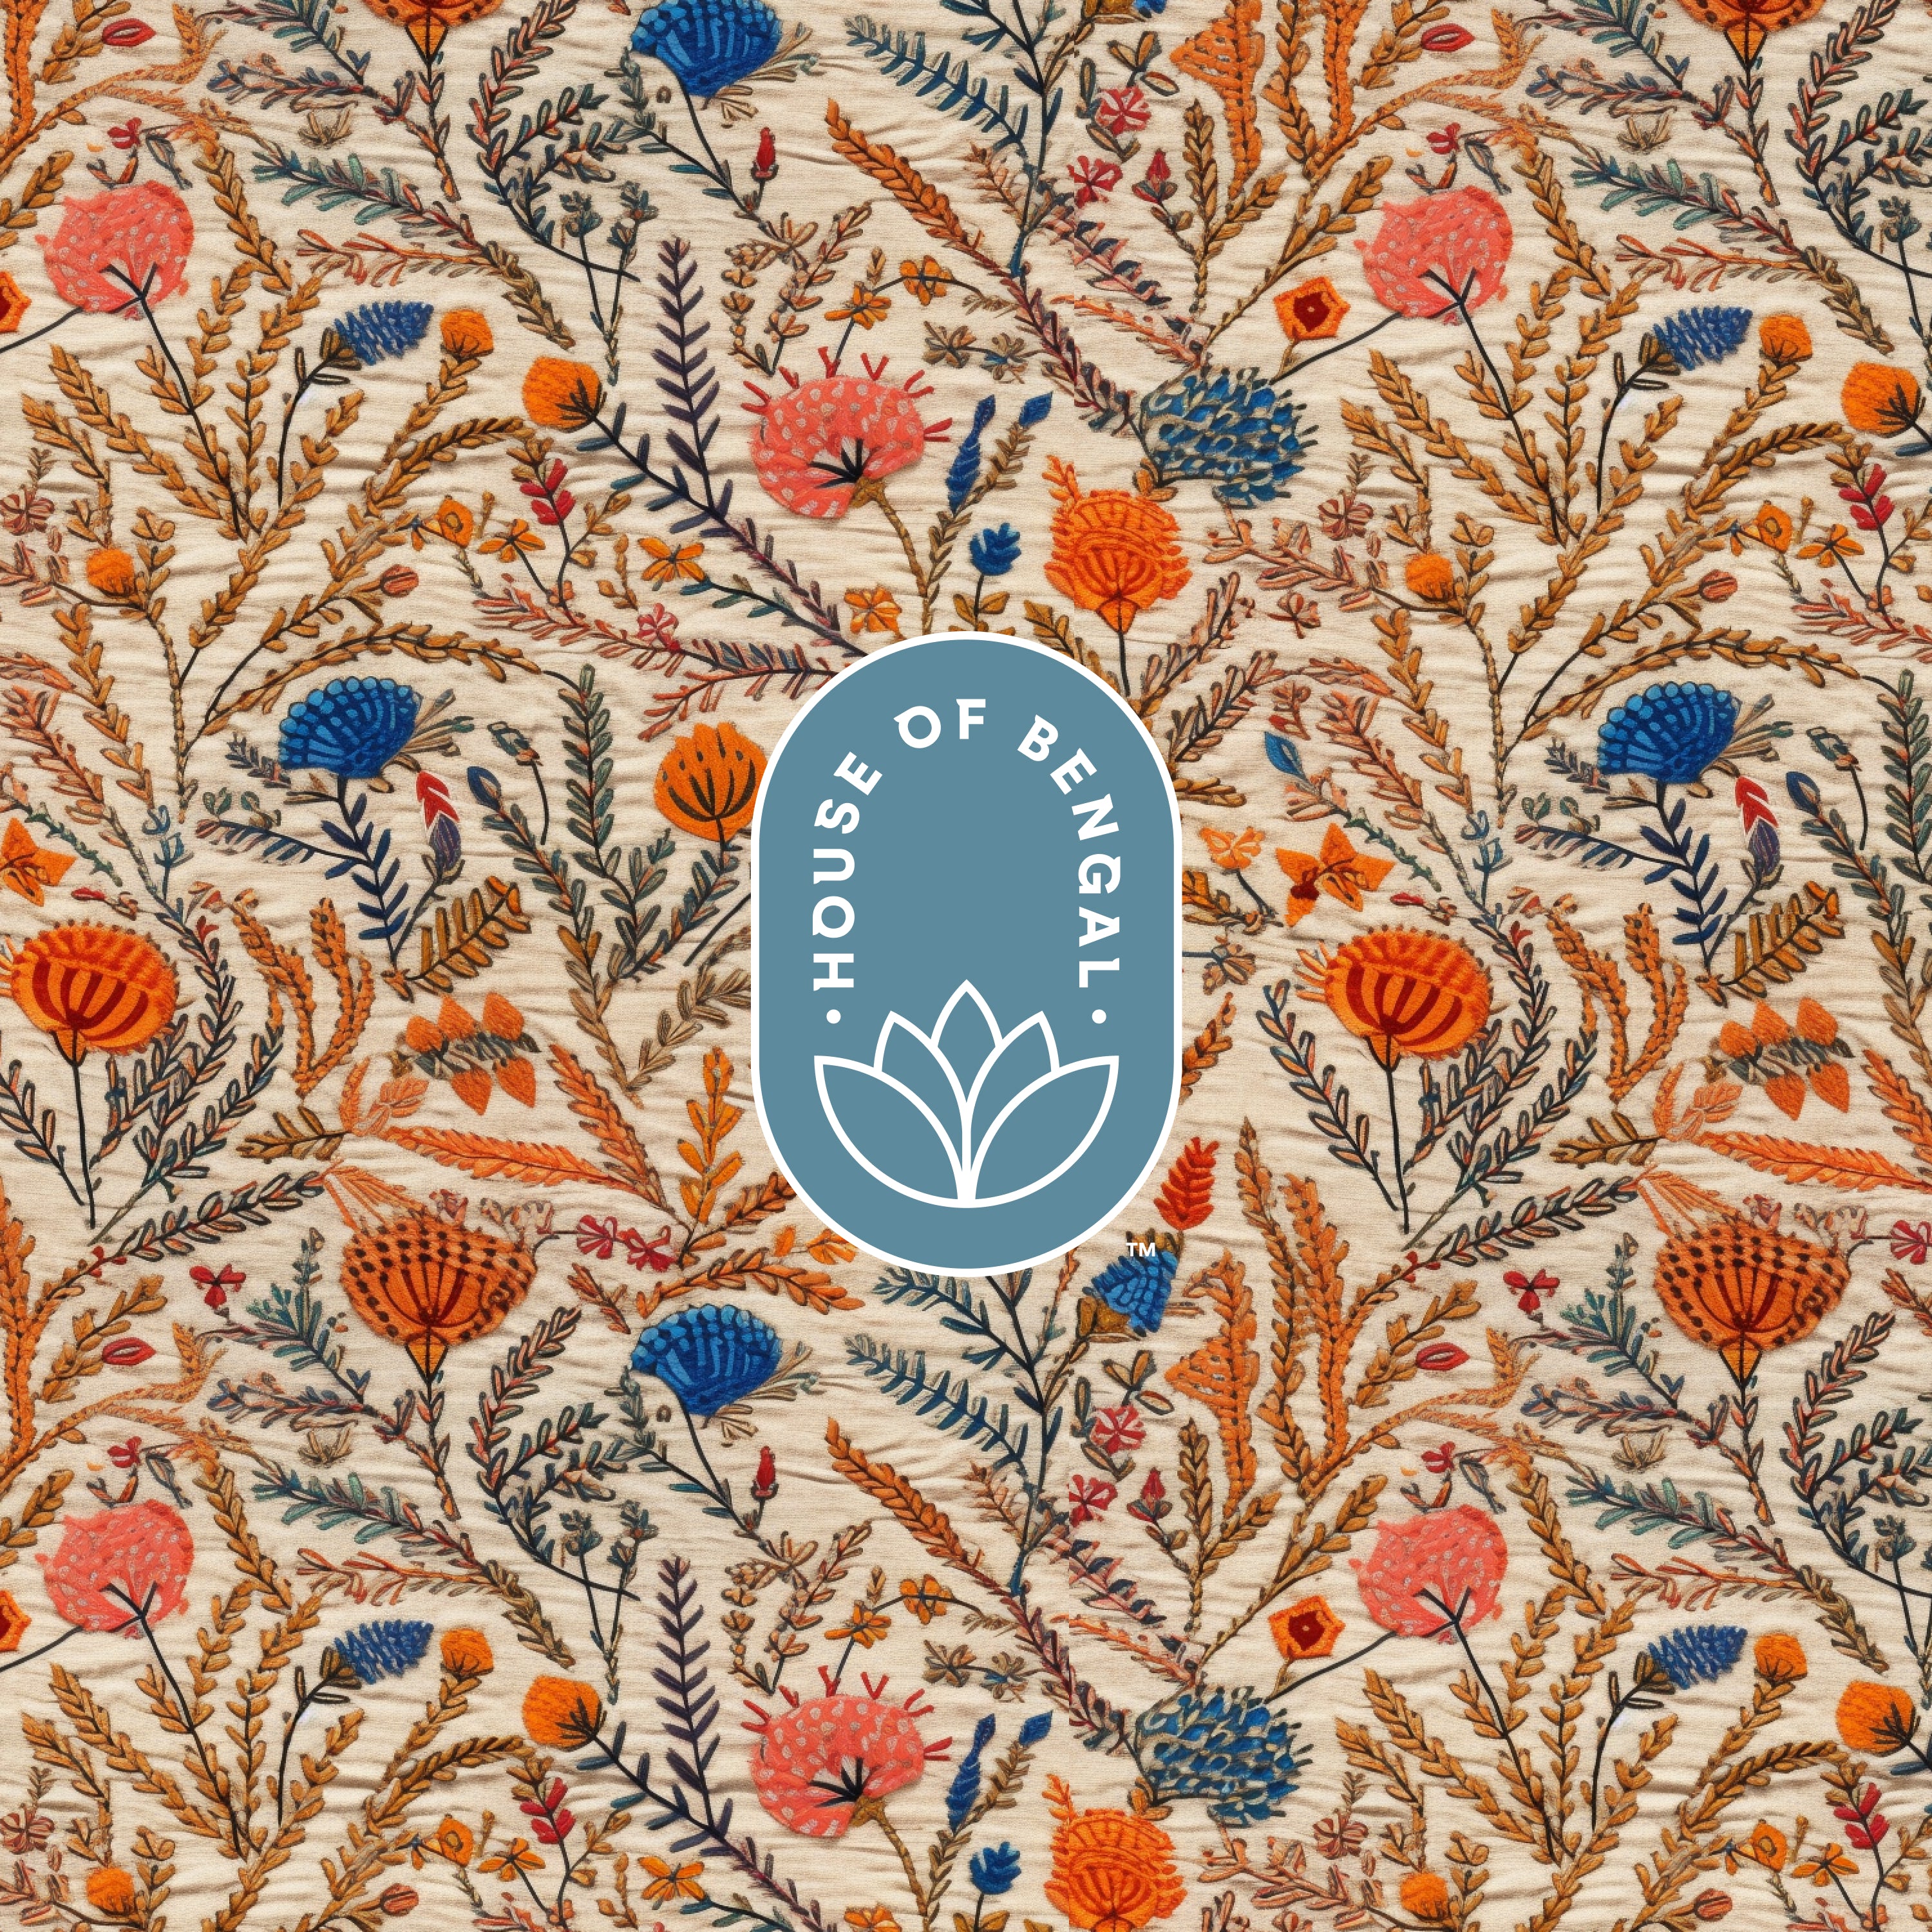 Embroidered Bengali textile pattern featuring stems, leaves and flowers in cream, orange, pink, blue, green